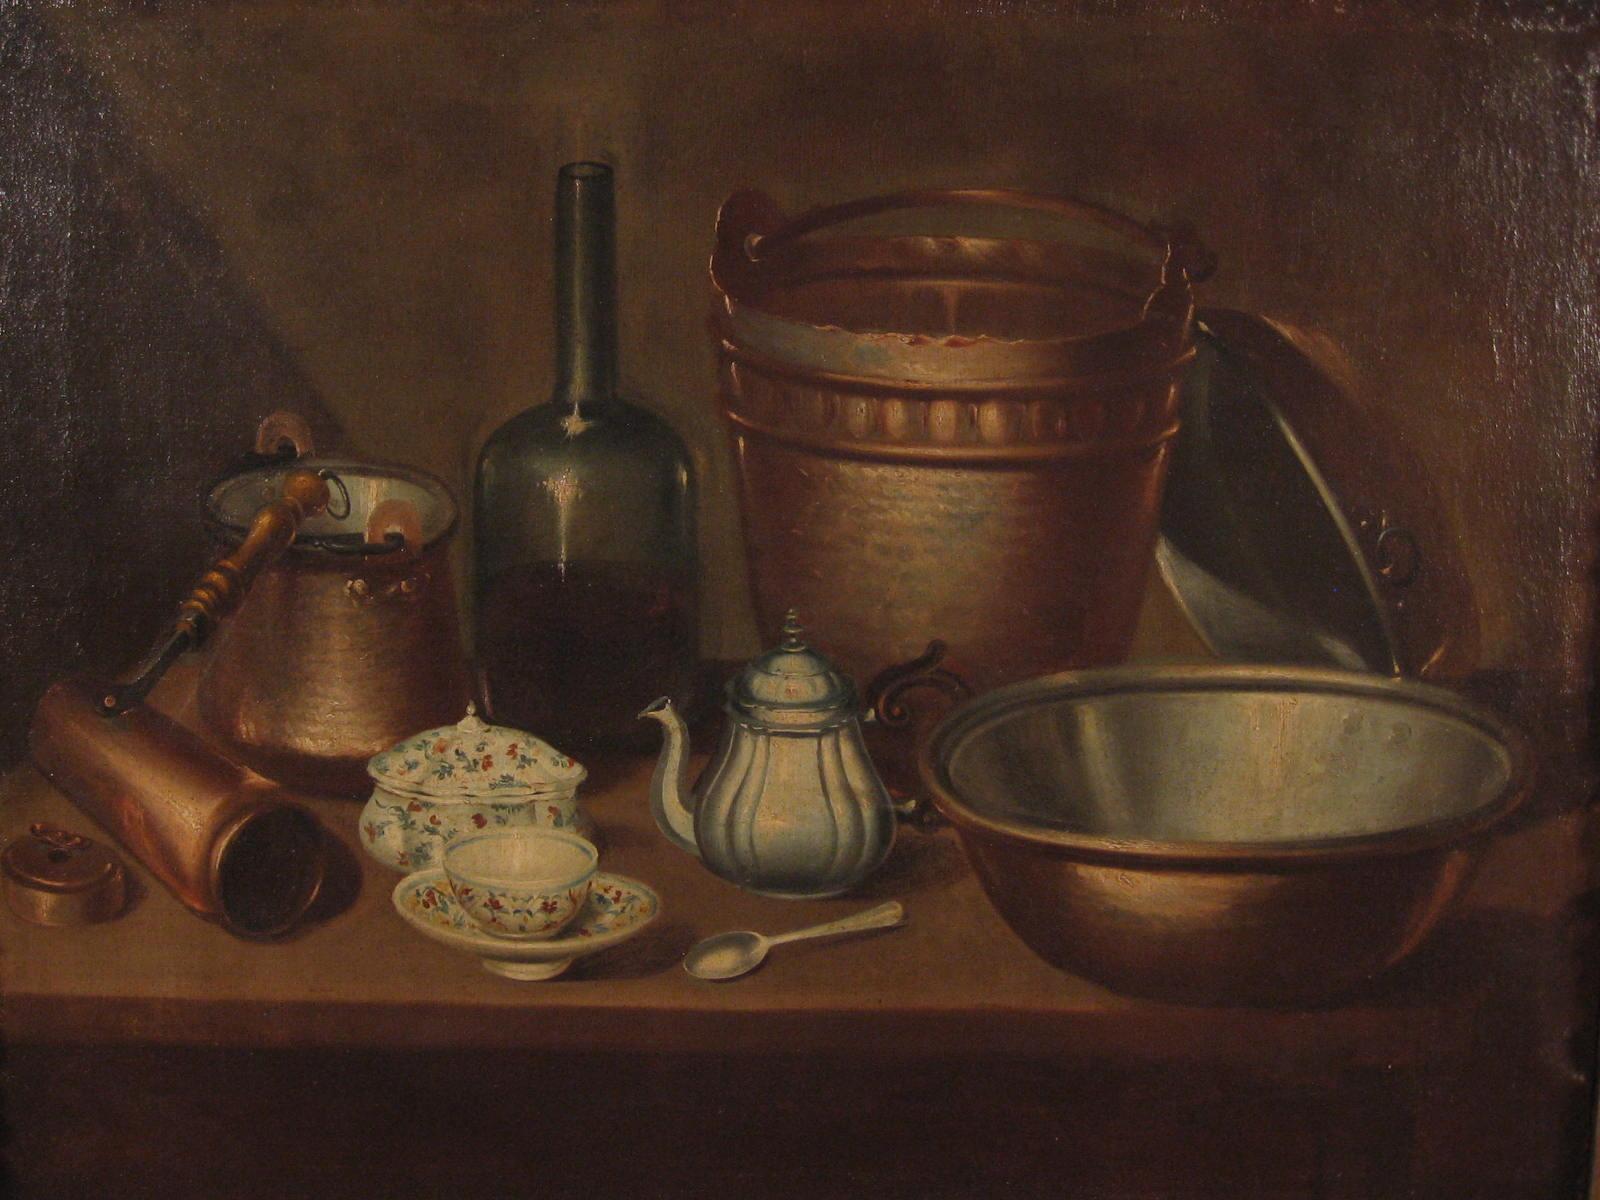 Still life with copper crockery, bottle and majolica.

Emilian school, 18th century

On the top of a table there are some copper crockery for daily use, an excellently painted glass bottle, some majolica, a spoon and a pewter coffee pot.
The